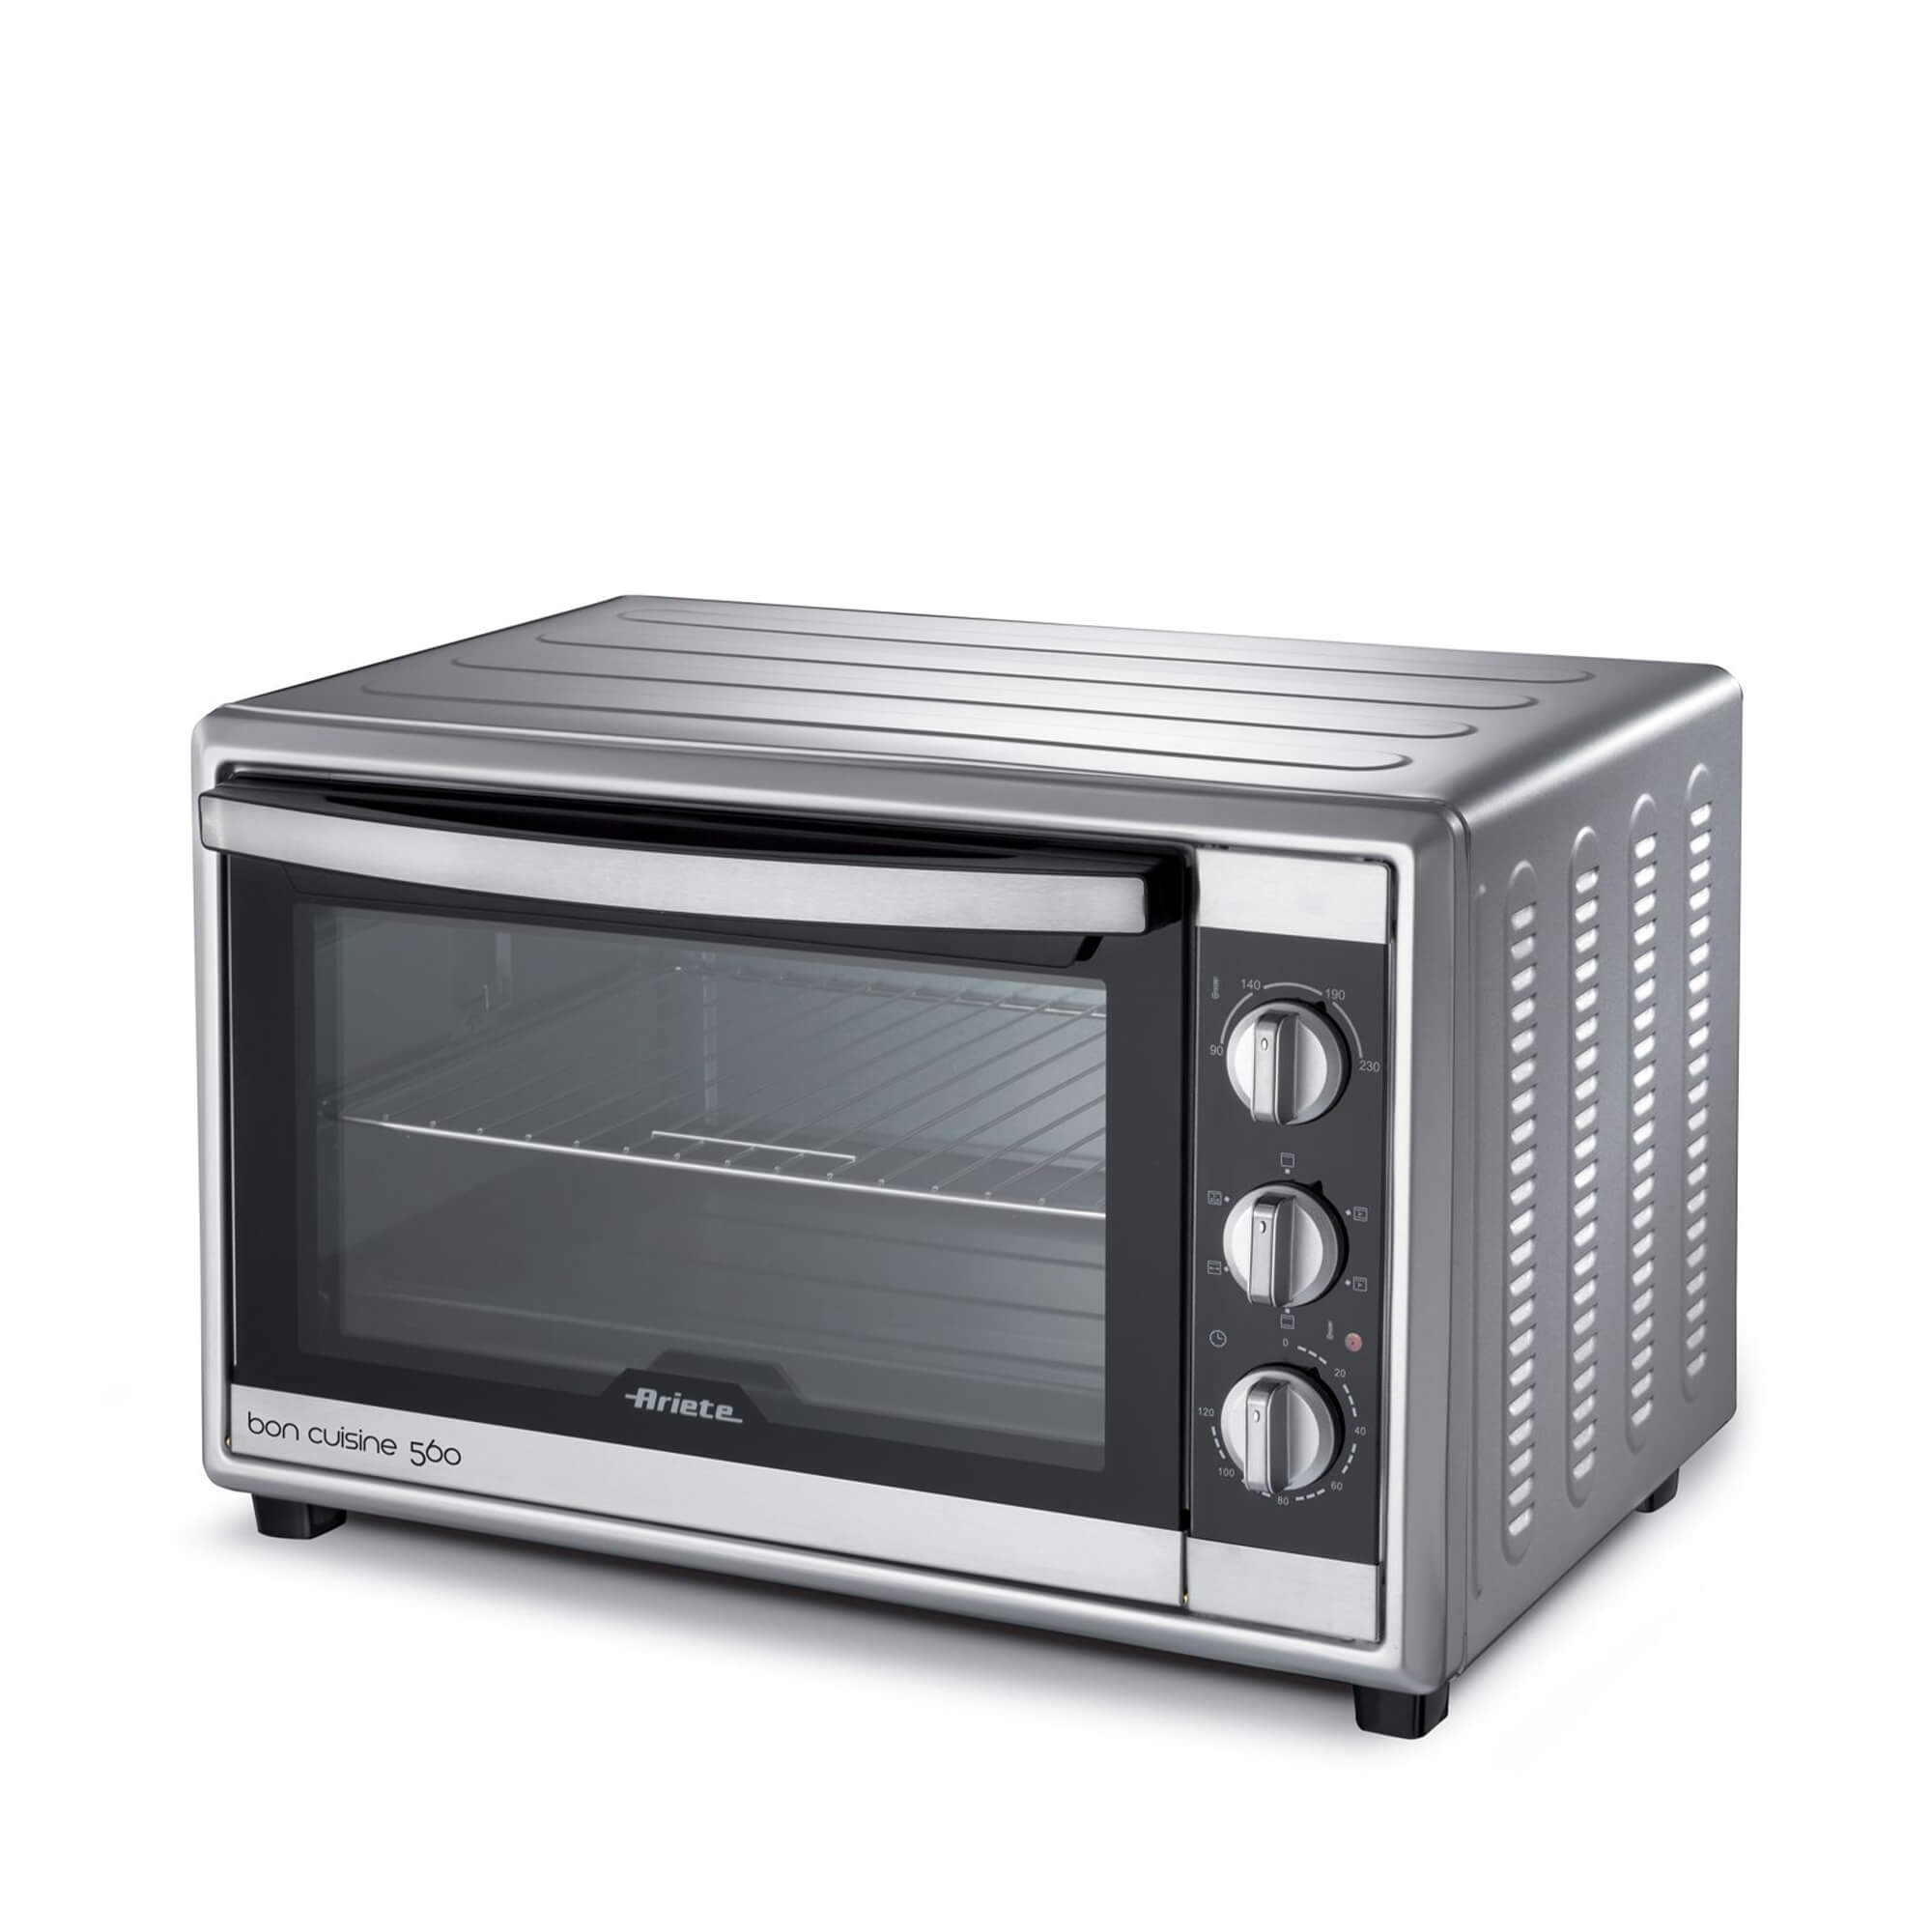 45 liter Electric Oven / Baking Oven / Convection Electric Oven